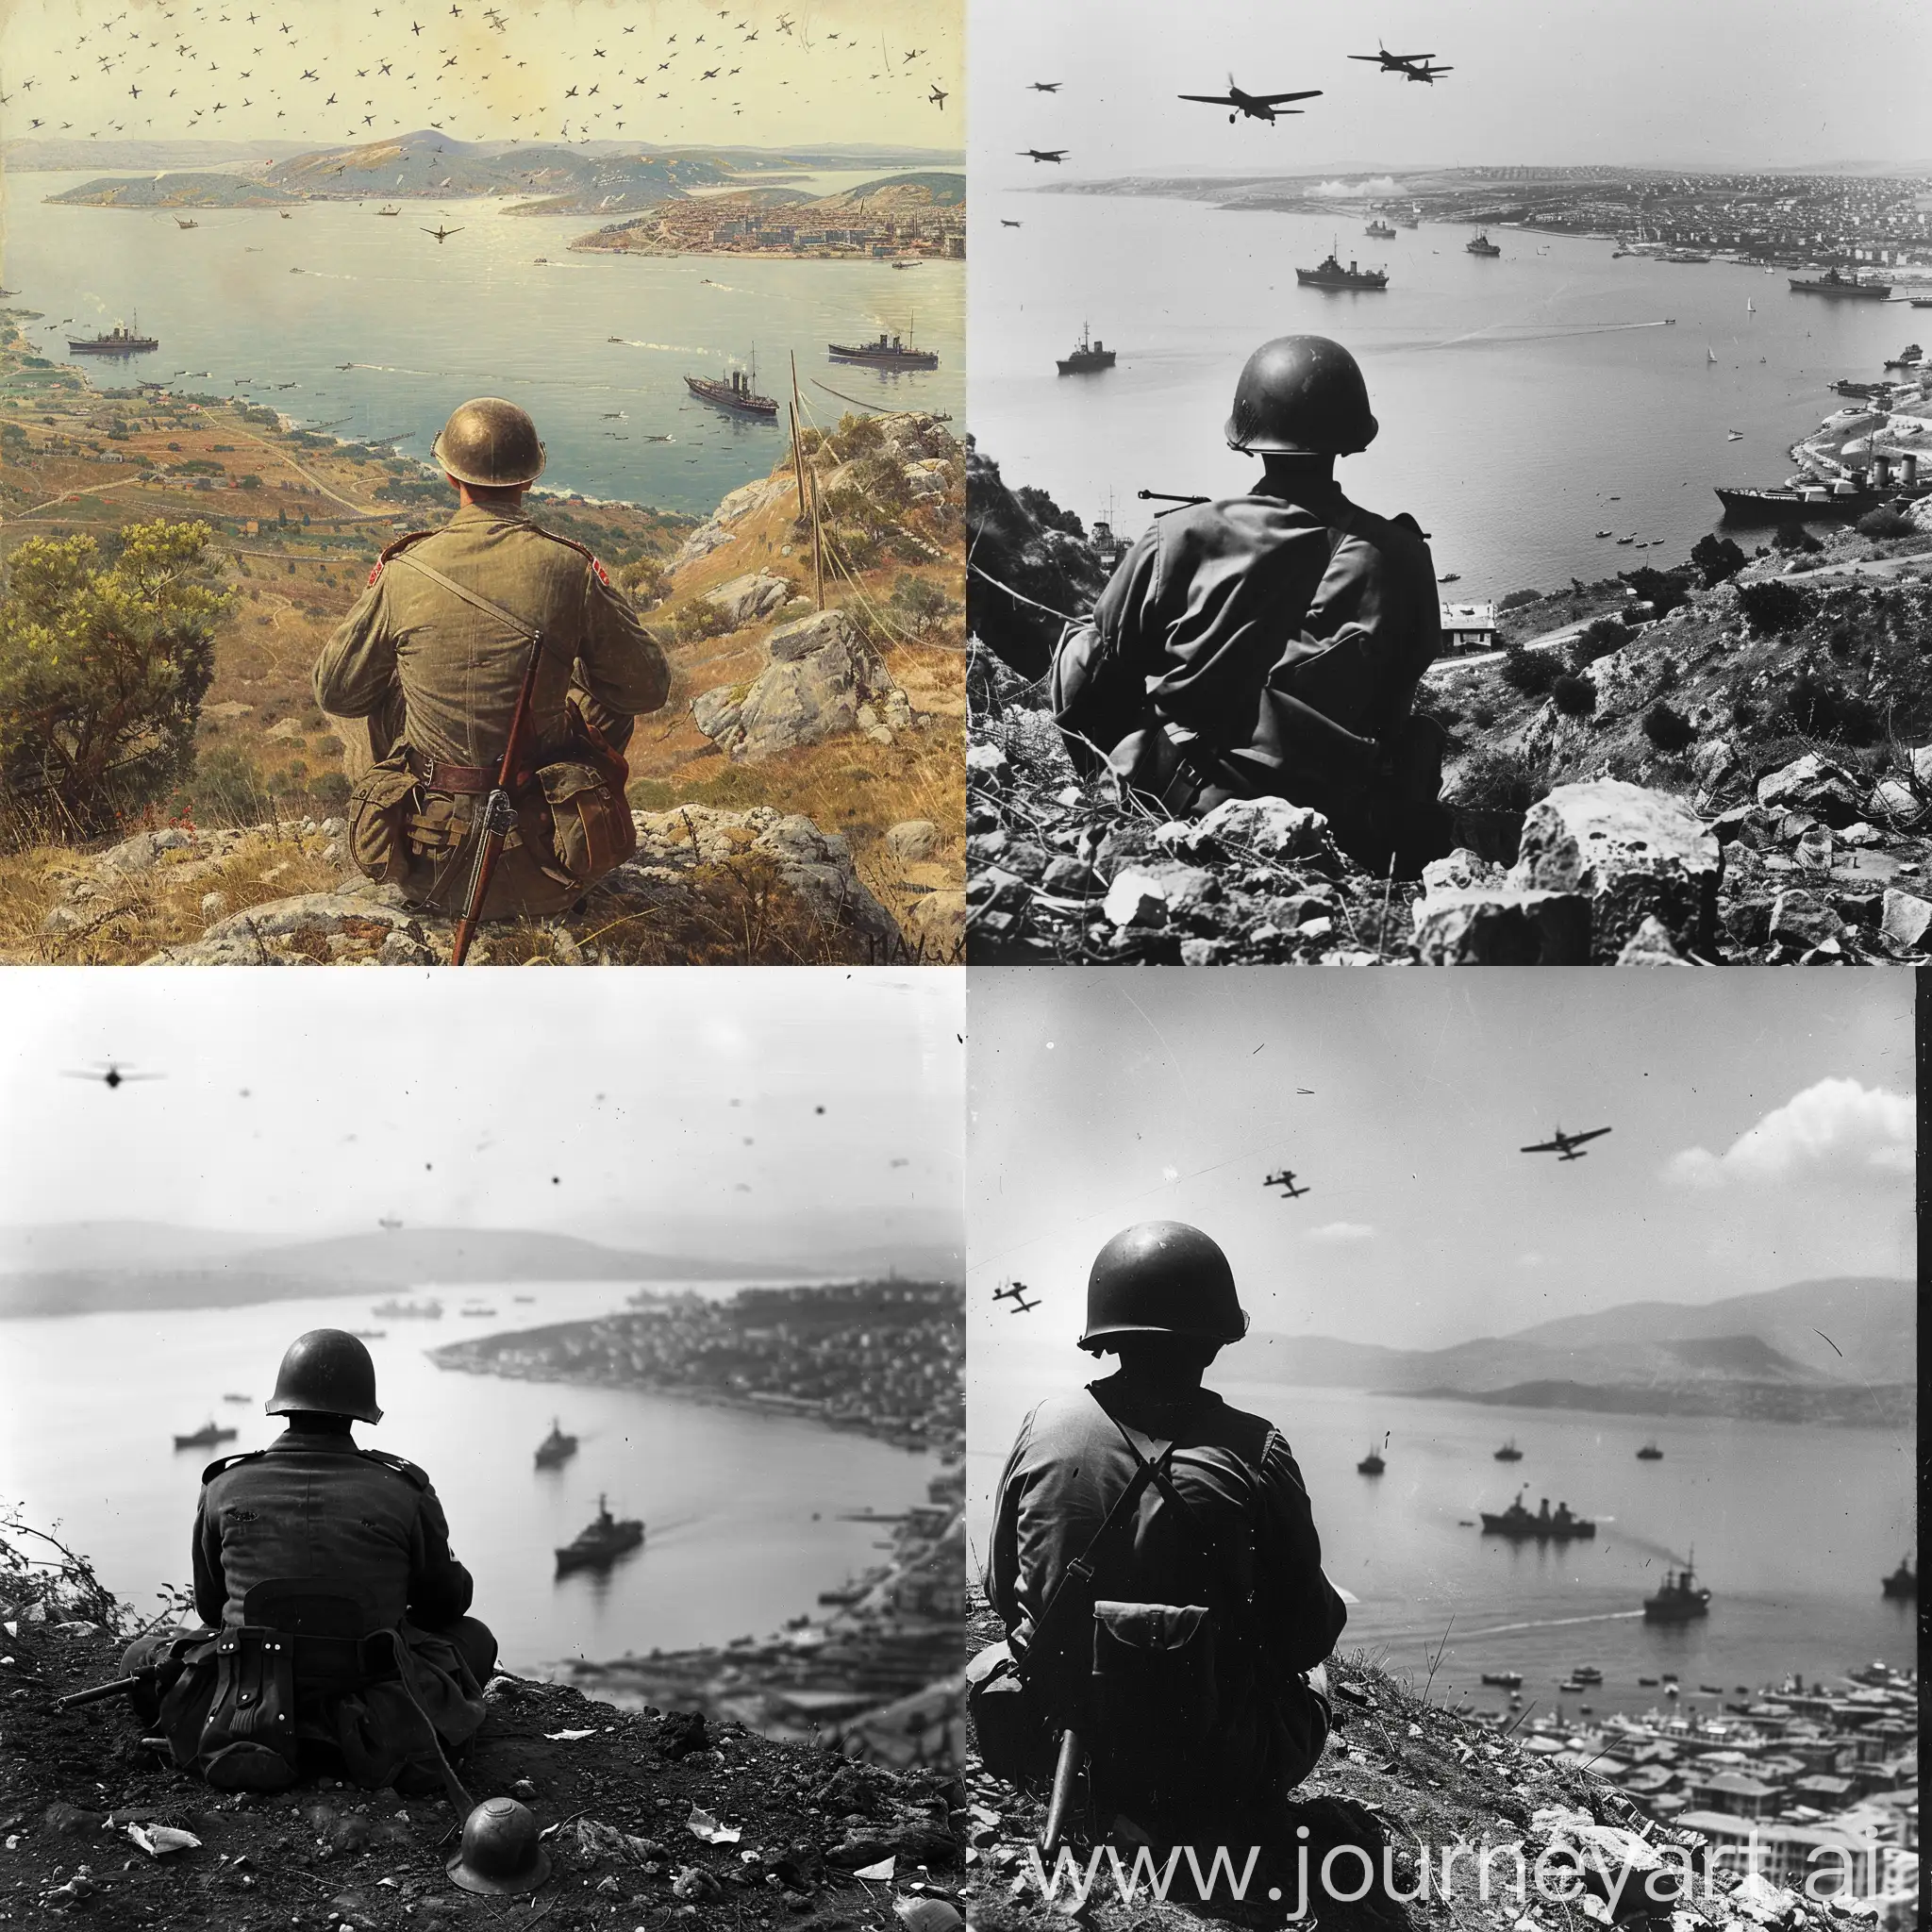 Solitary-Canakkale-Soldier-Observing-Enemy-Invasion